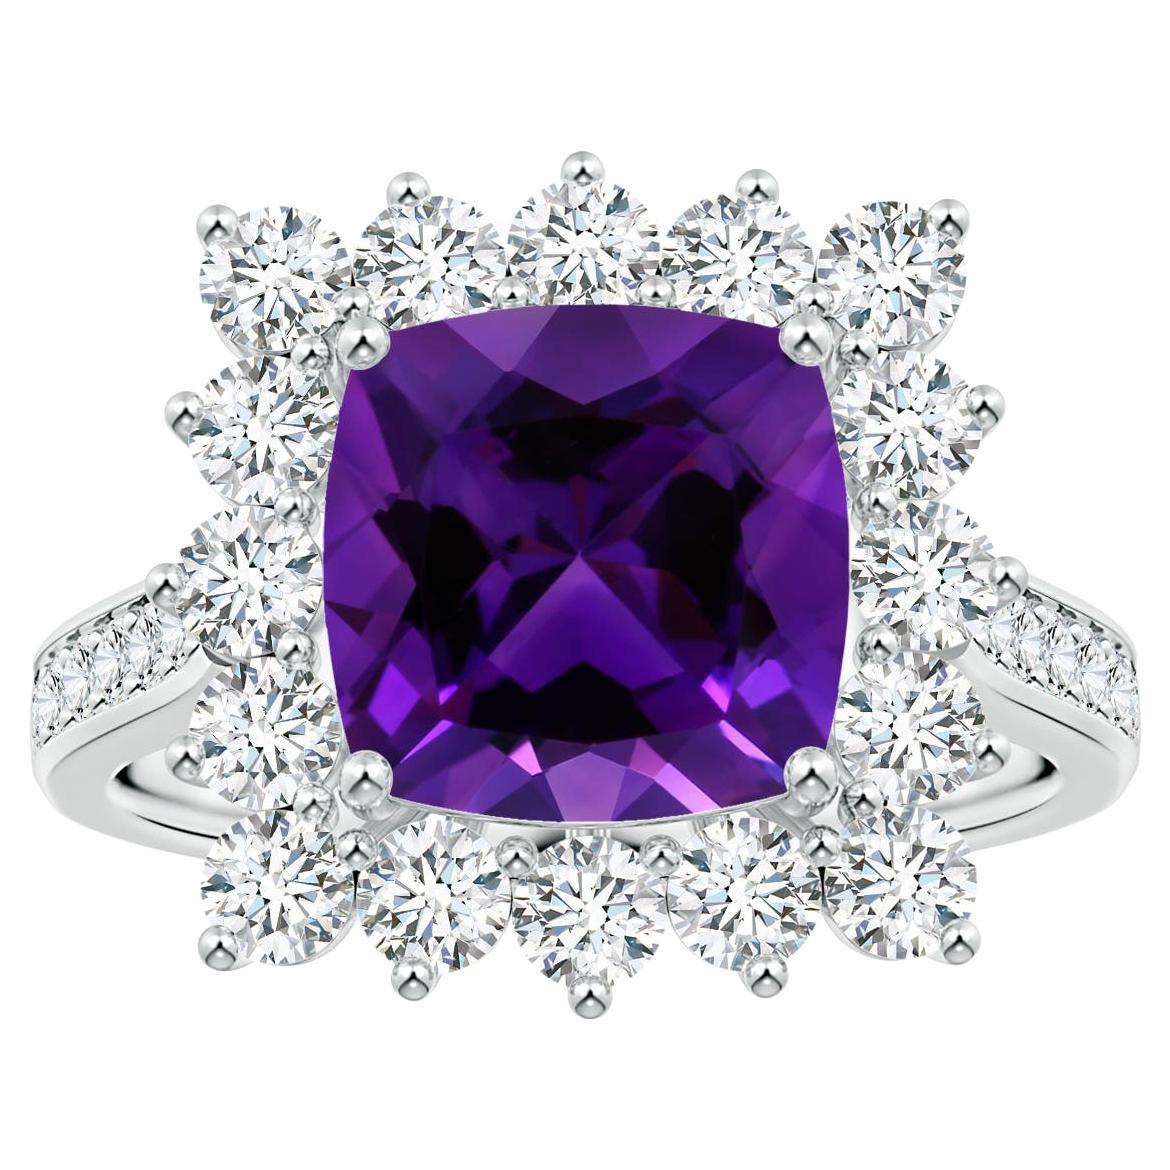 For Sale:  ANGARA Princess Diana Inspired GIA Certified Cushion Amethyst Ring in White Gold